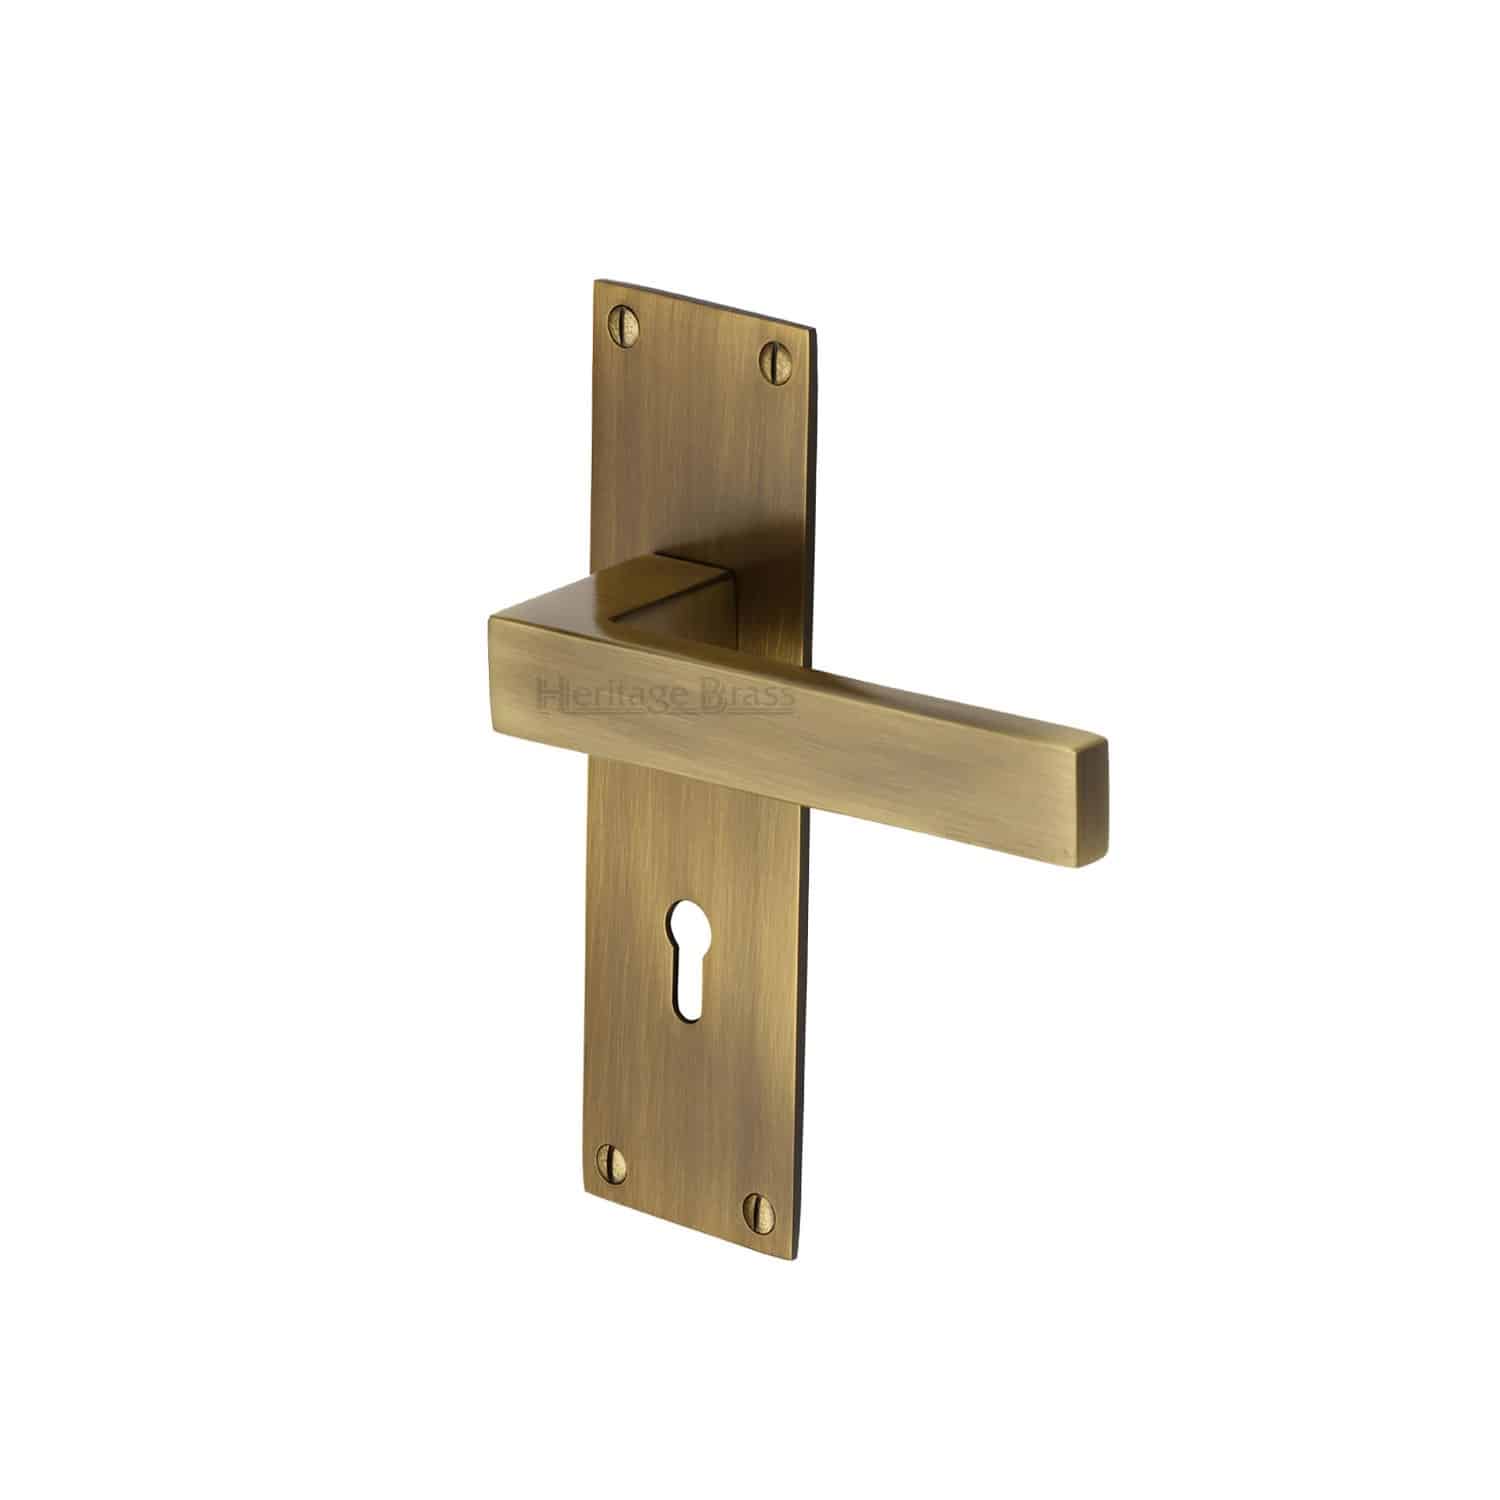 Heritage Brass Cabinet Pull Industrial Design 128mm CTC Antique Brass Finish